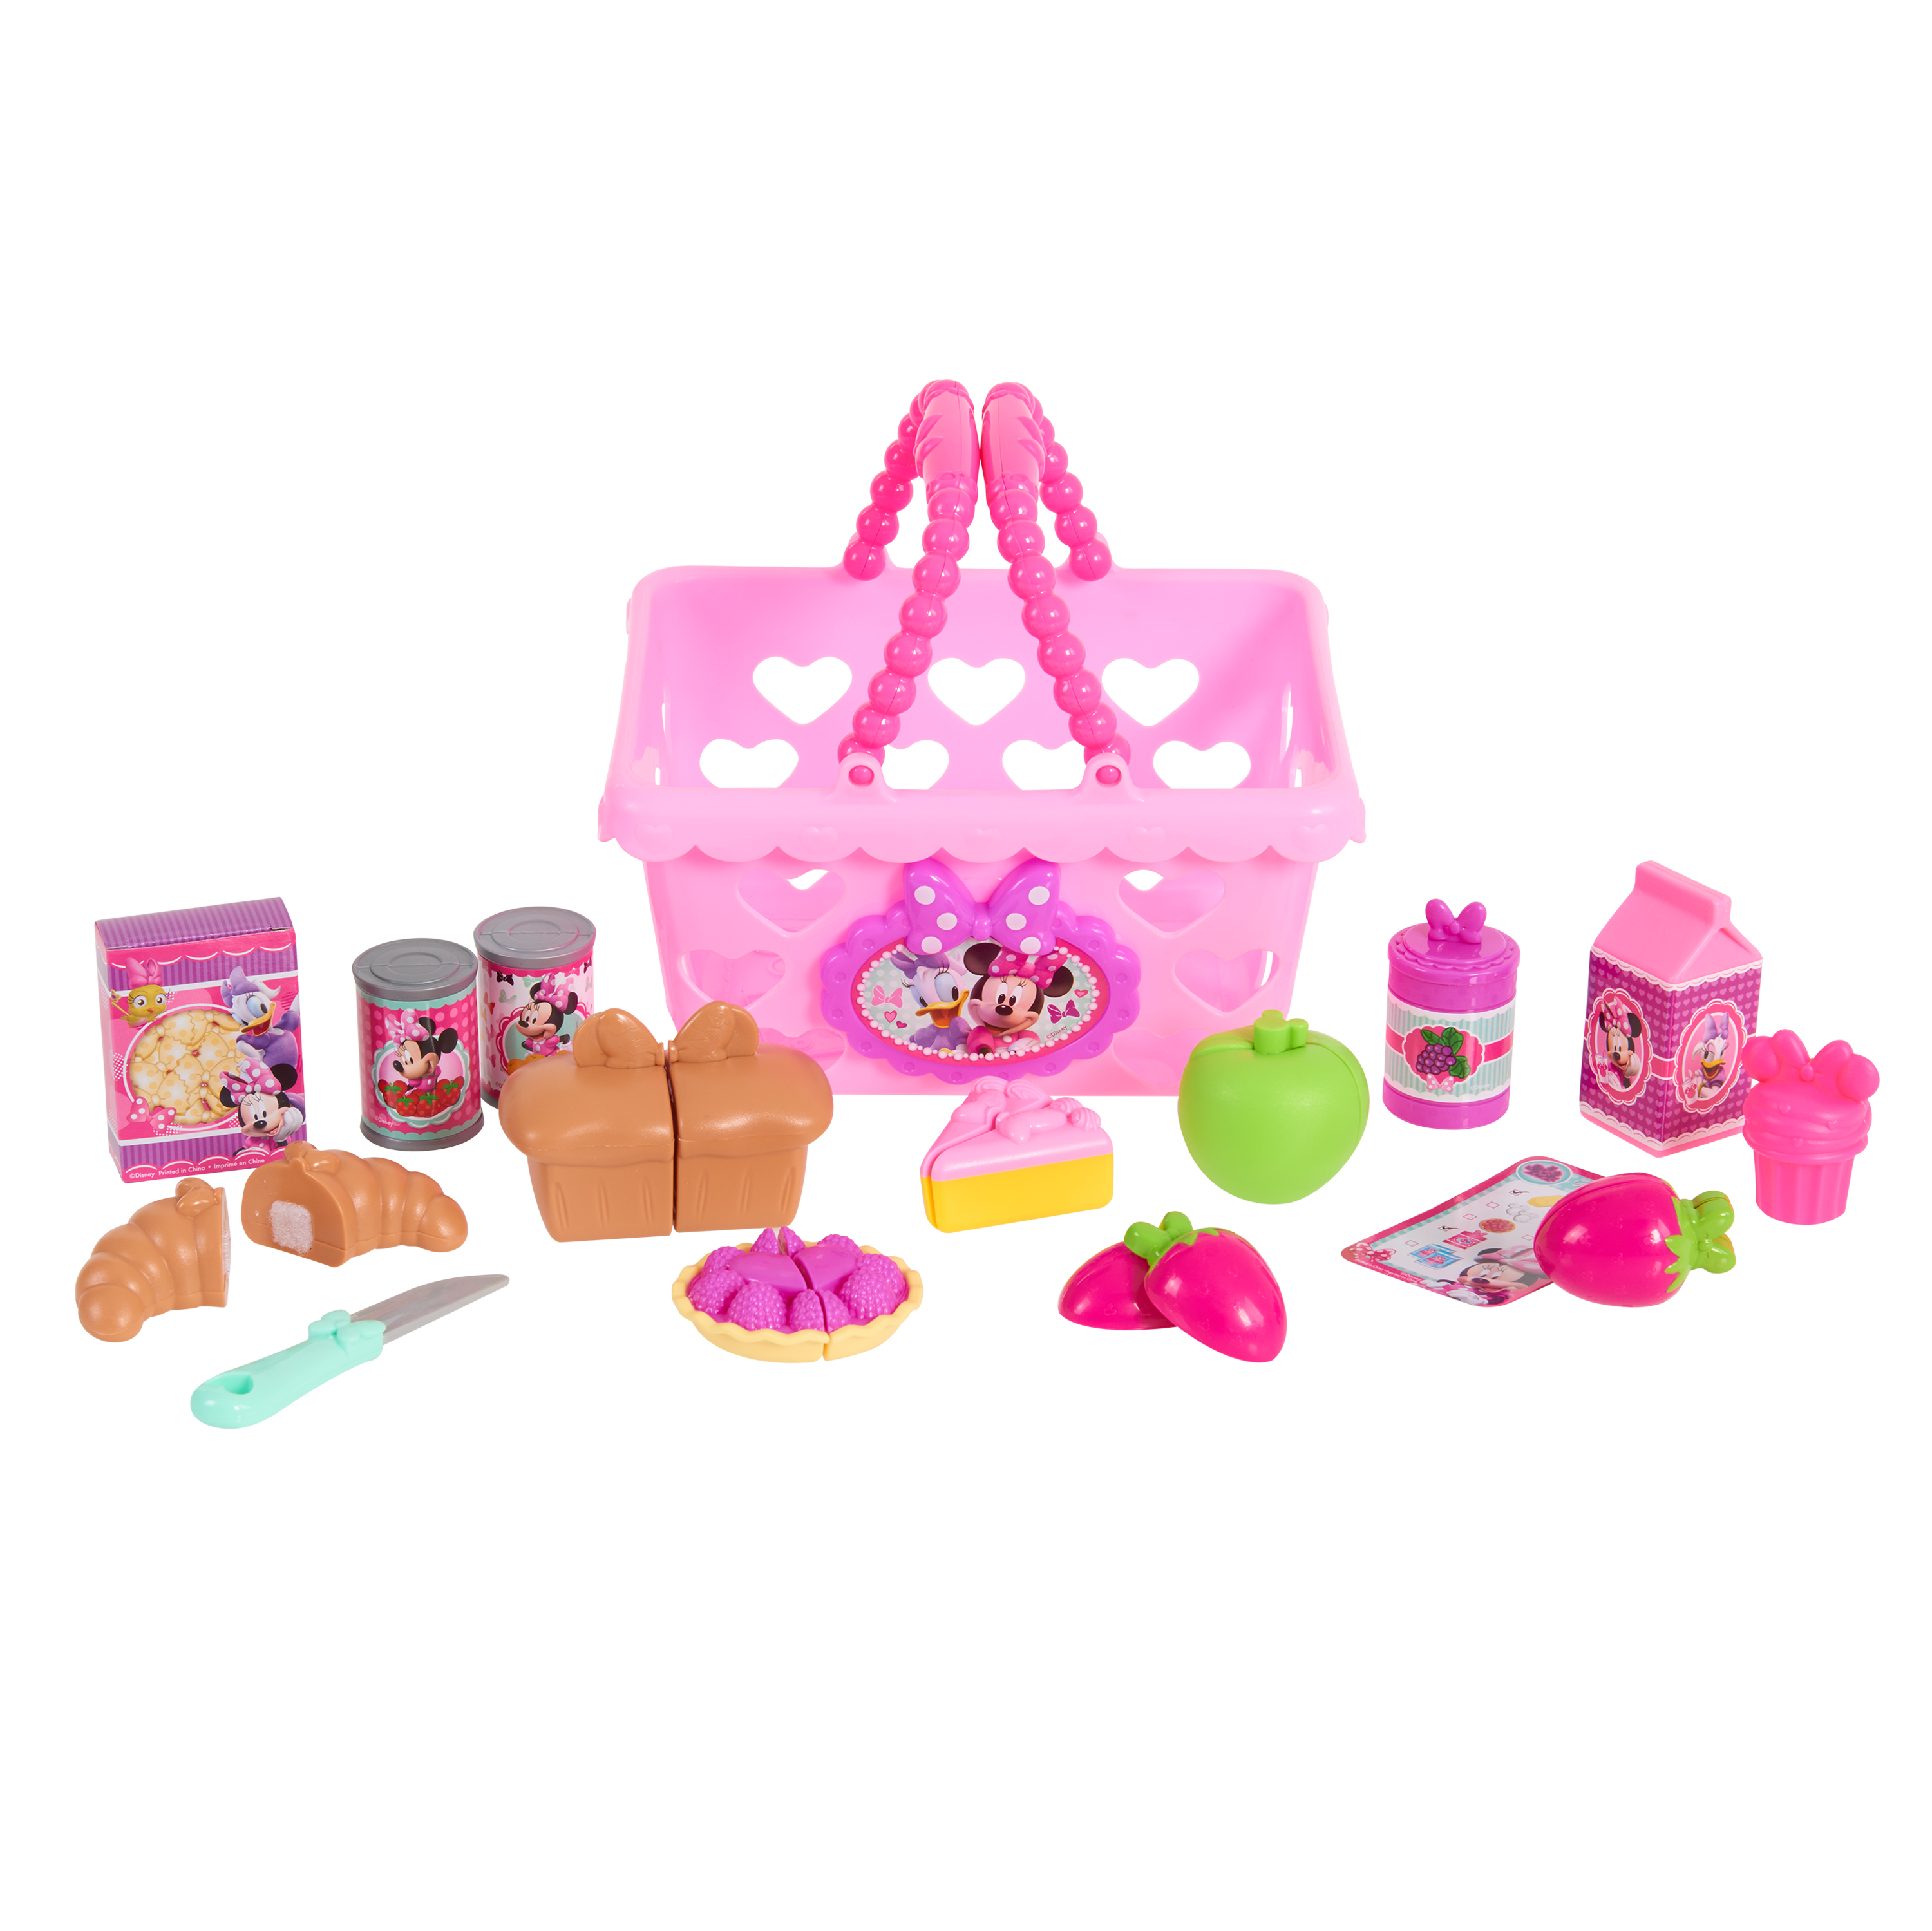 Minnie's happy helpers bowtastic shopping basket - image 1 of 2